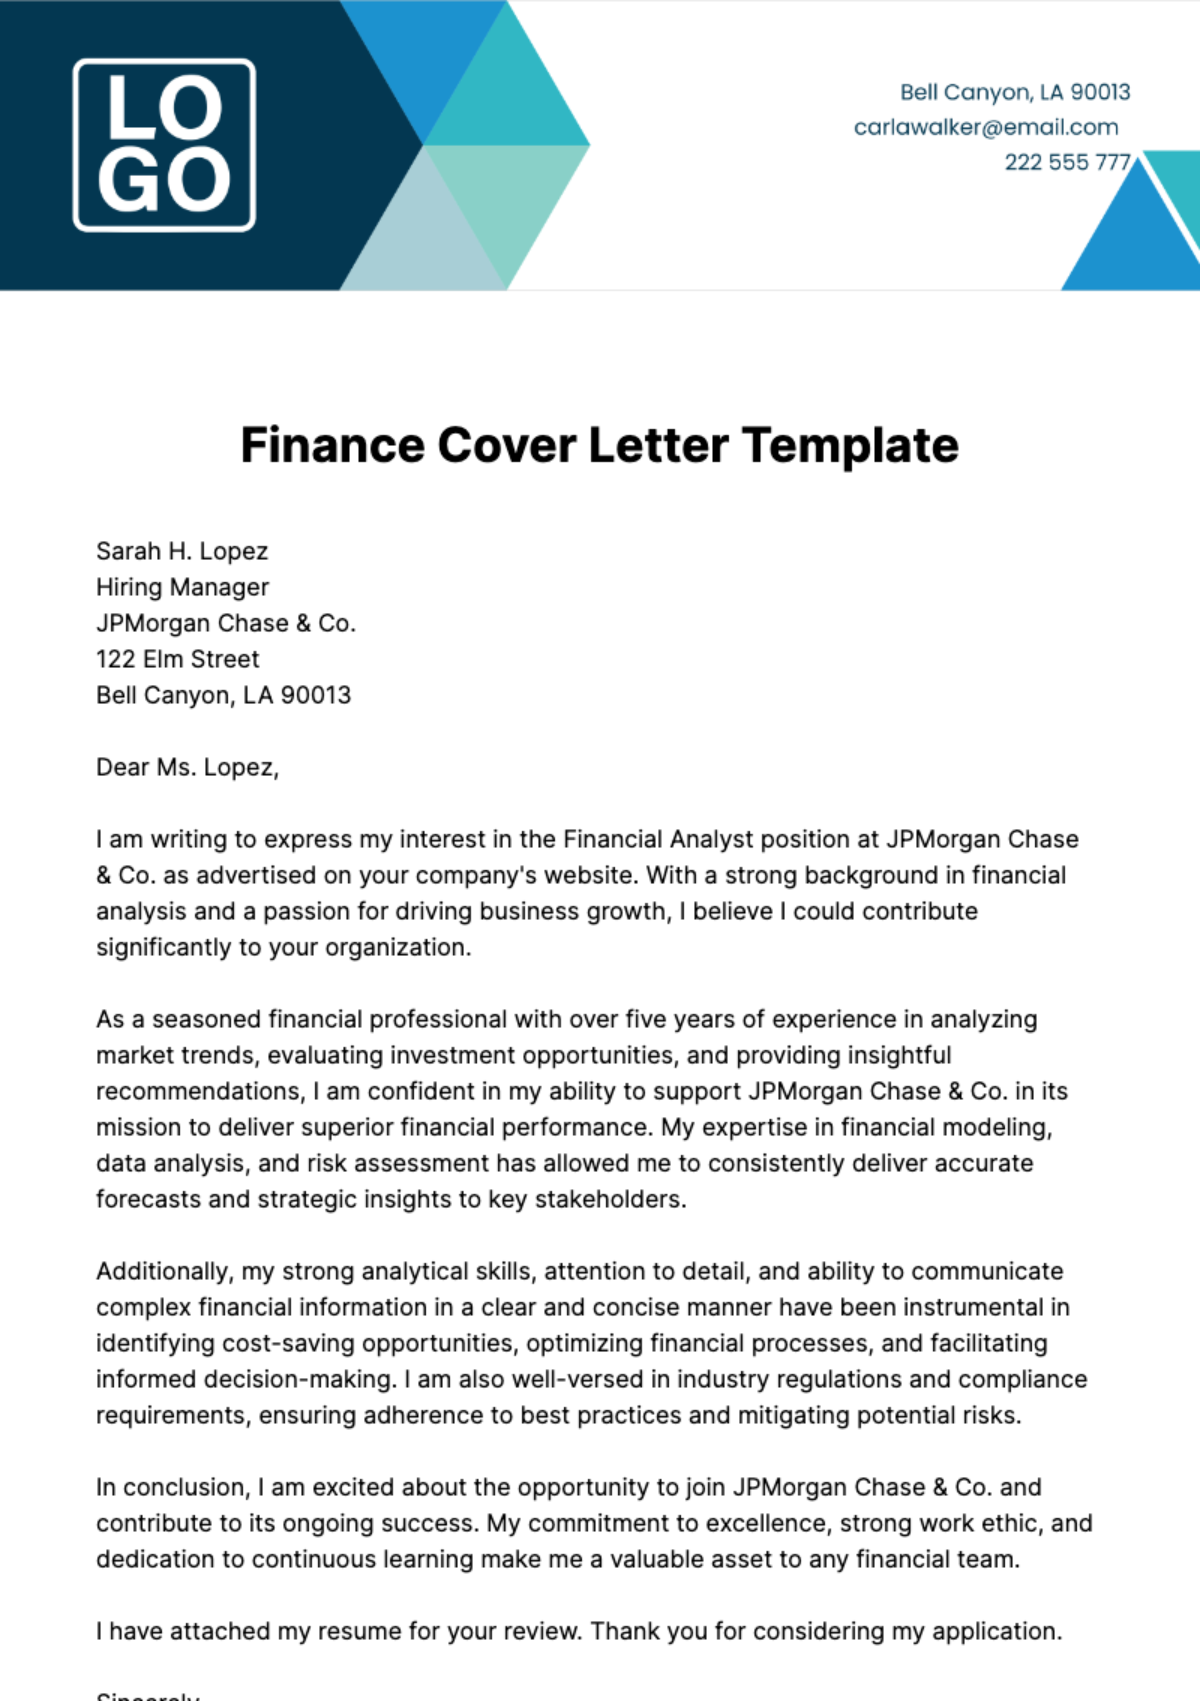 Free Finance Cover Letter  Template